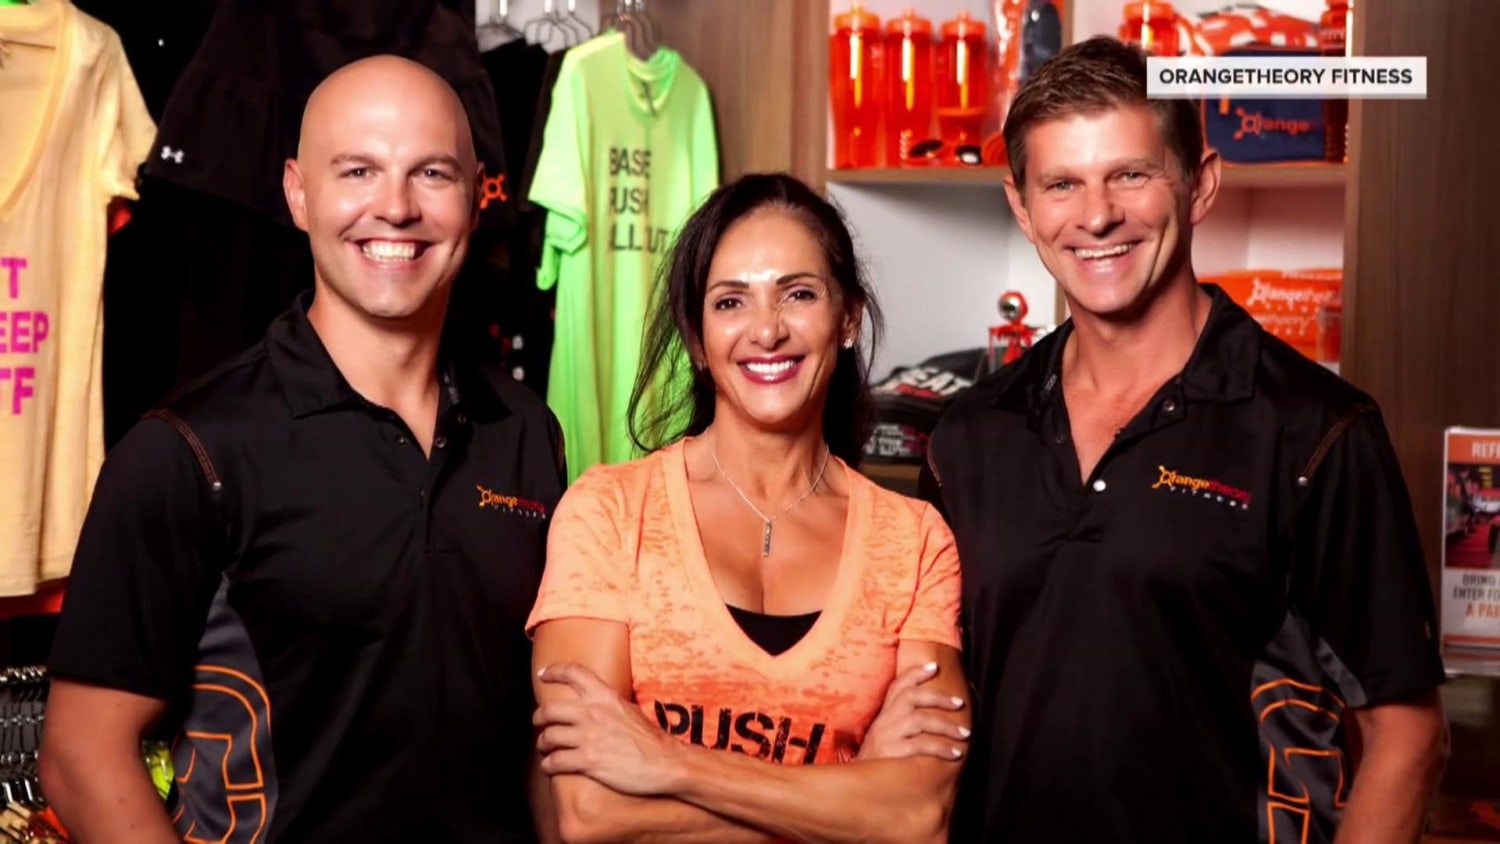 Orangetheory Fitness CEO Peddles Inaccurate Information to Lure